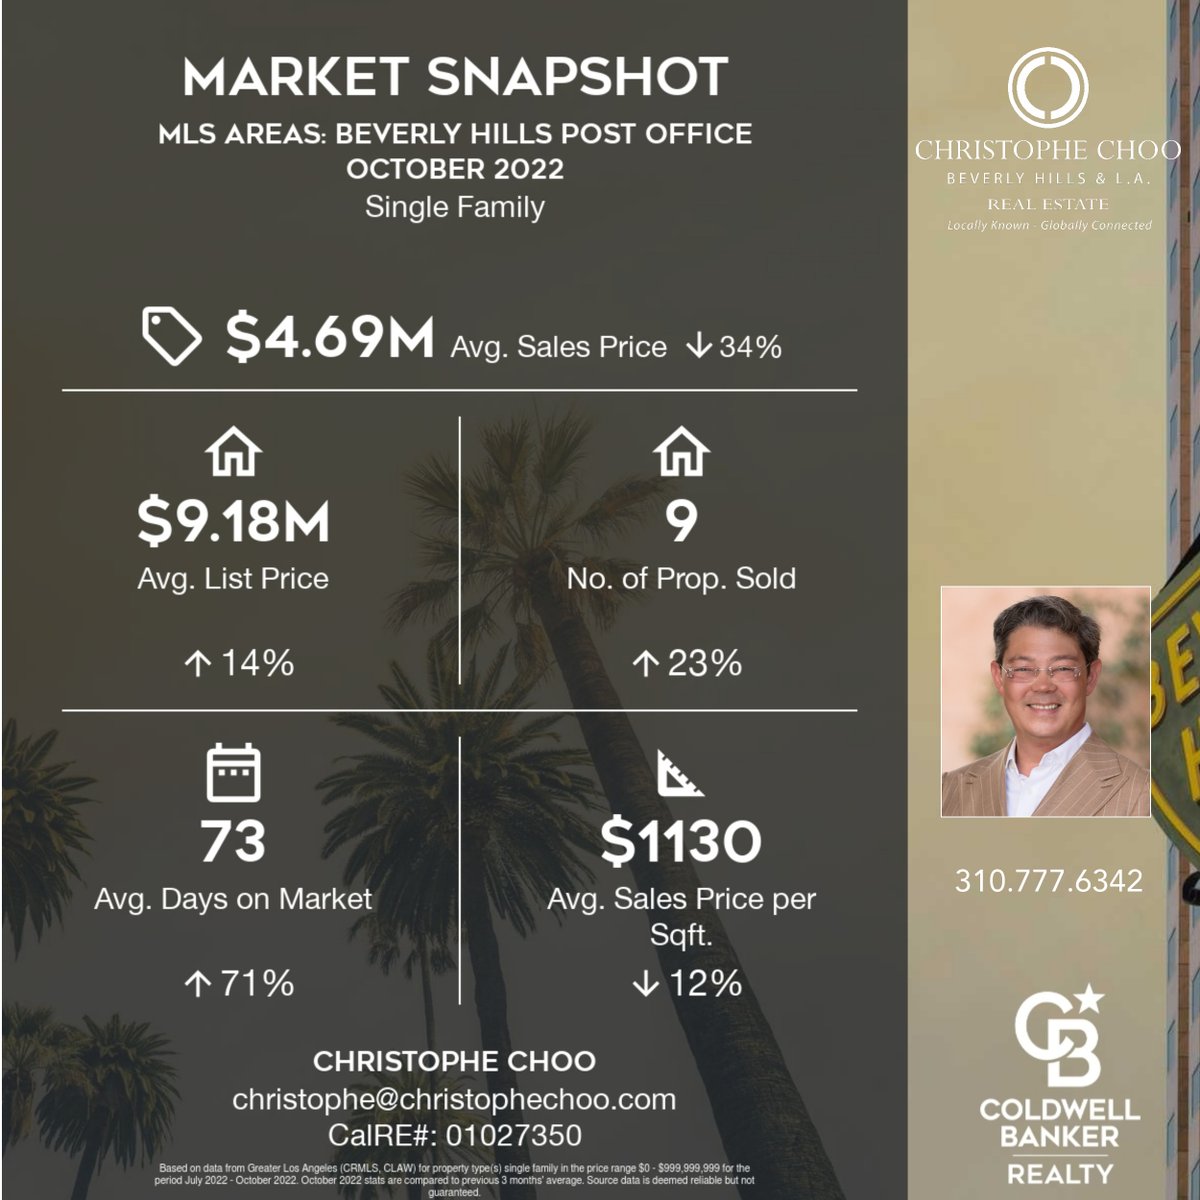 Market Snapshot - Beverly Hills Post Office as of October 2022

$4.69 million average sales price, down ⬇️ 34%

$9.18 million average list price, UP ⬆️ 14%

#beverlyhillspostoffice #sellingbeverlyhills #realestate #marketsnapshot